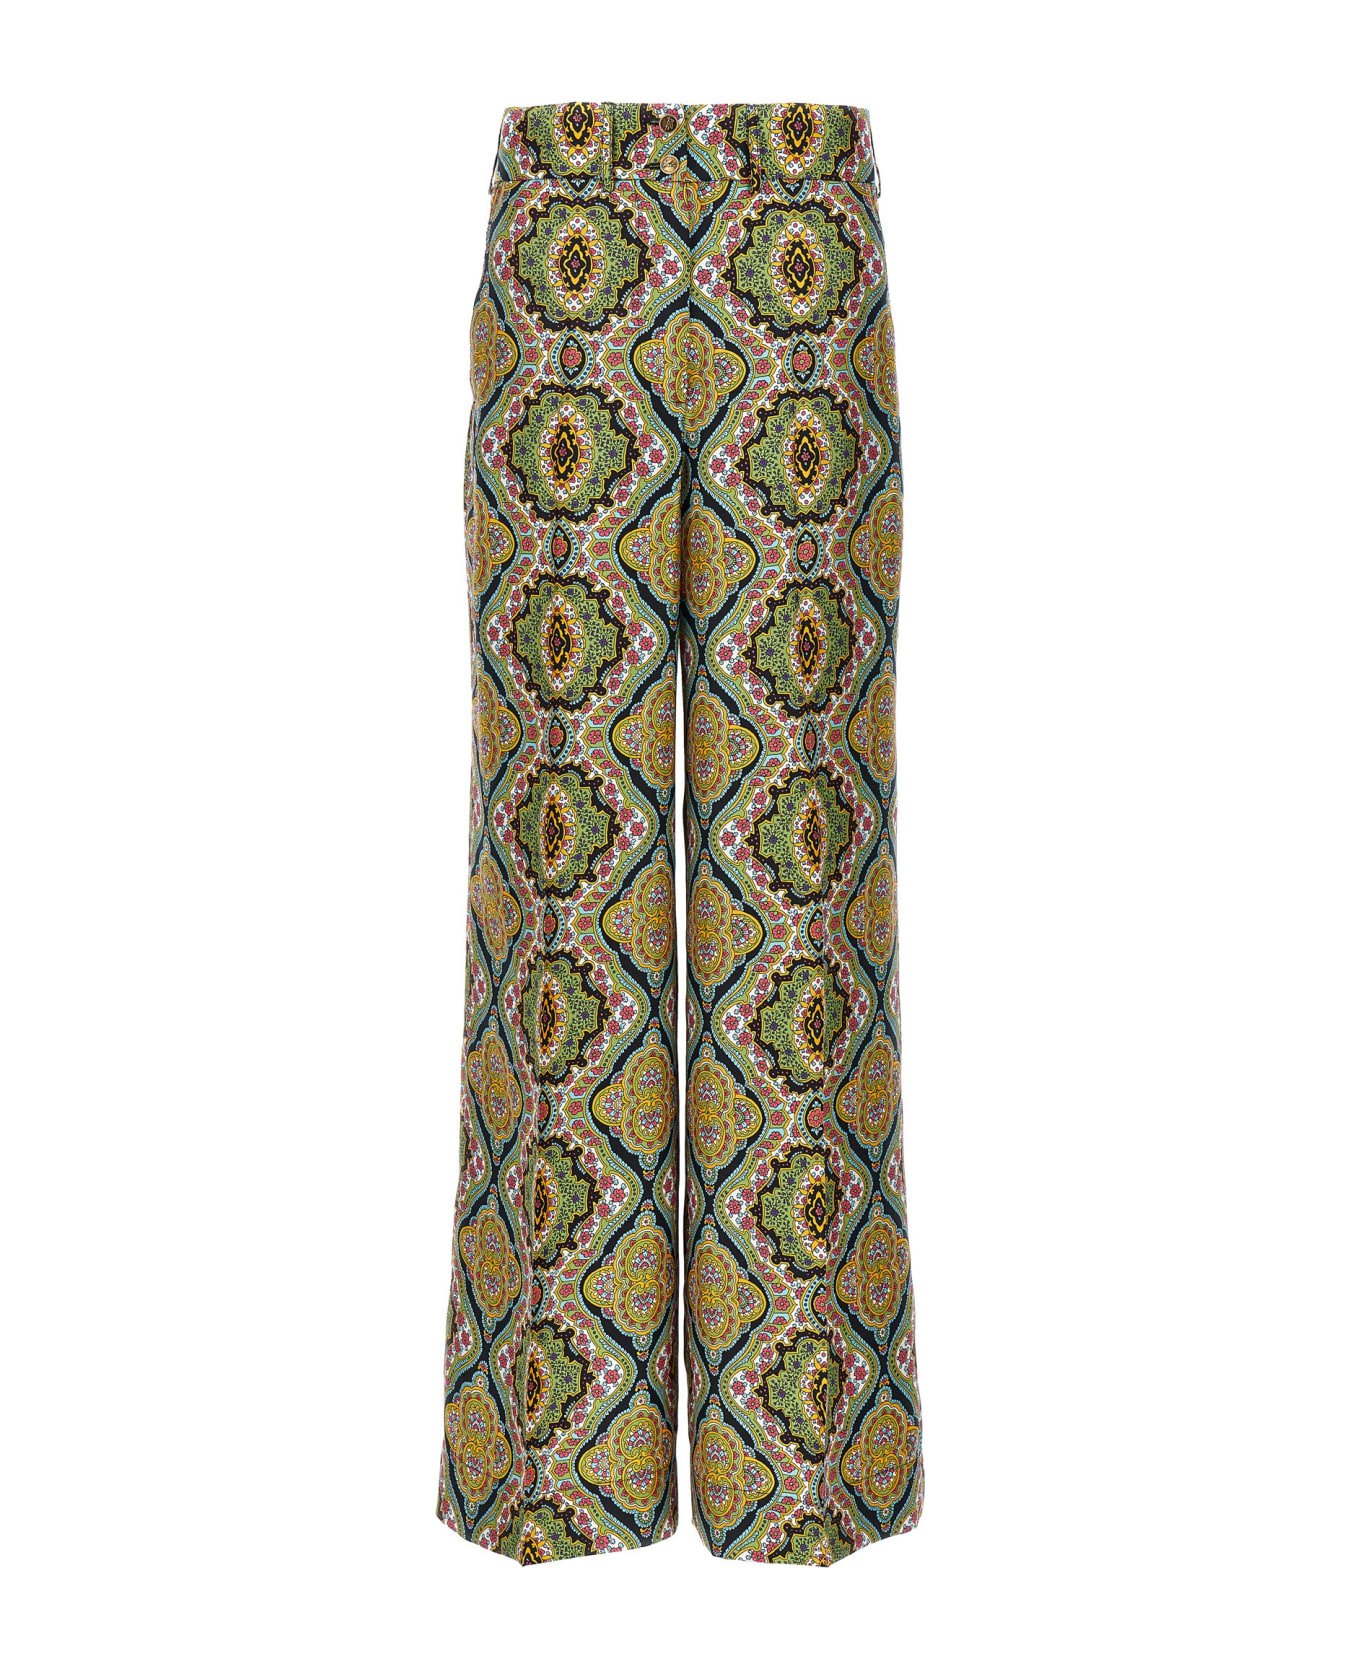 Etro All Over Print Pants - Green